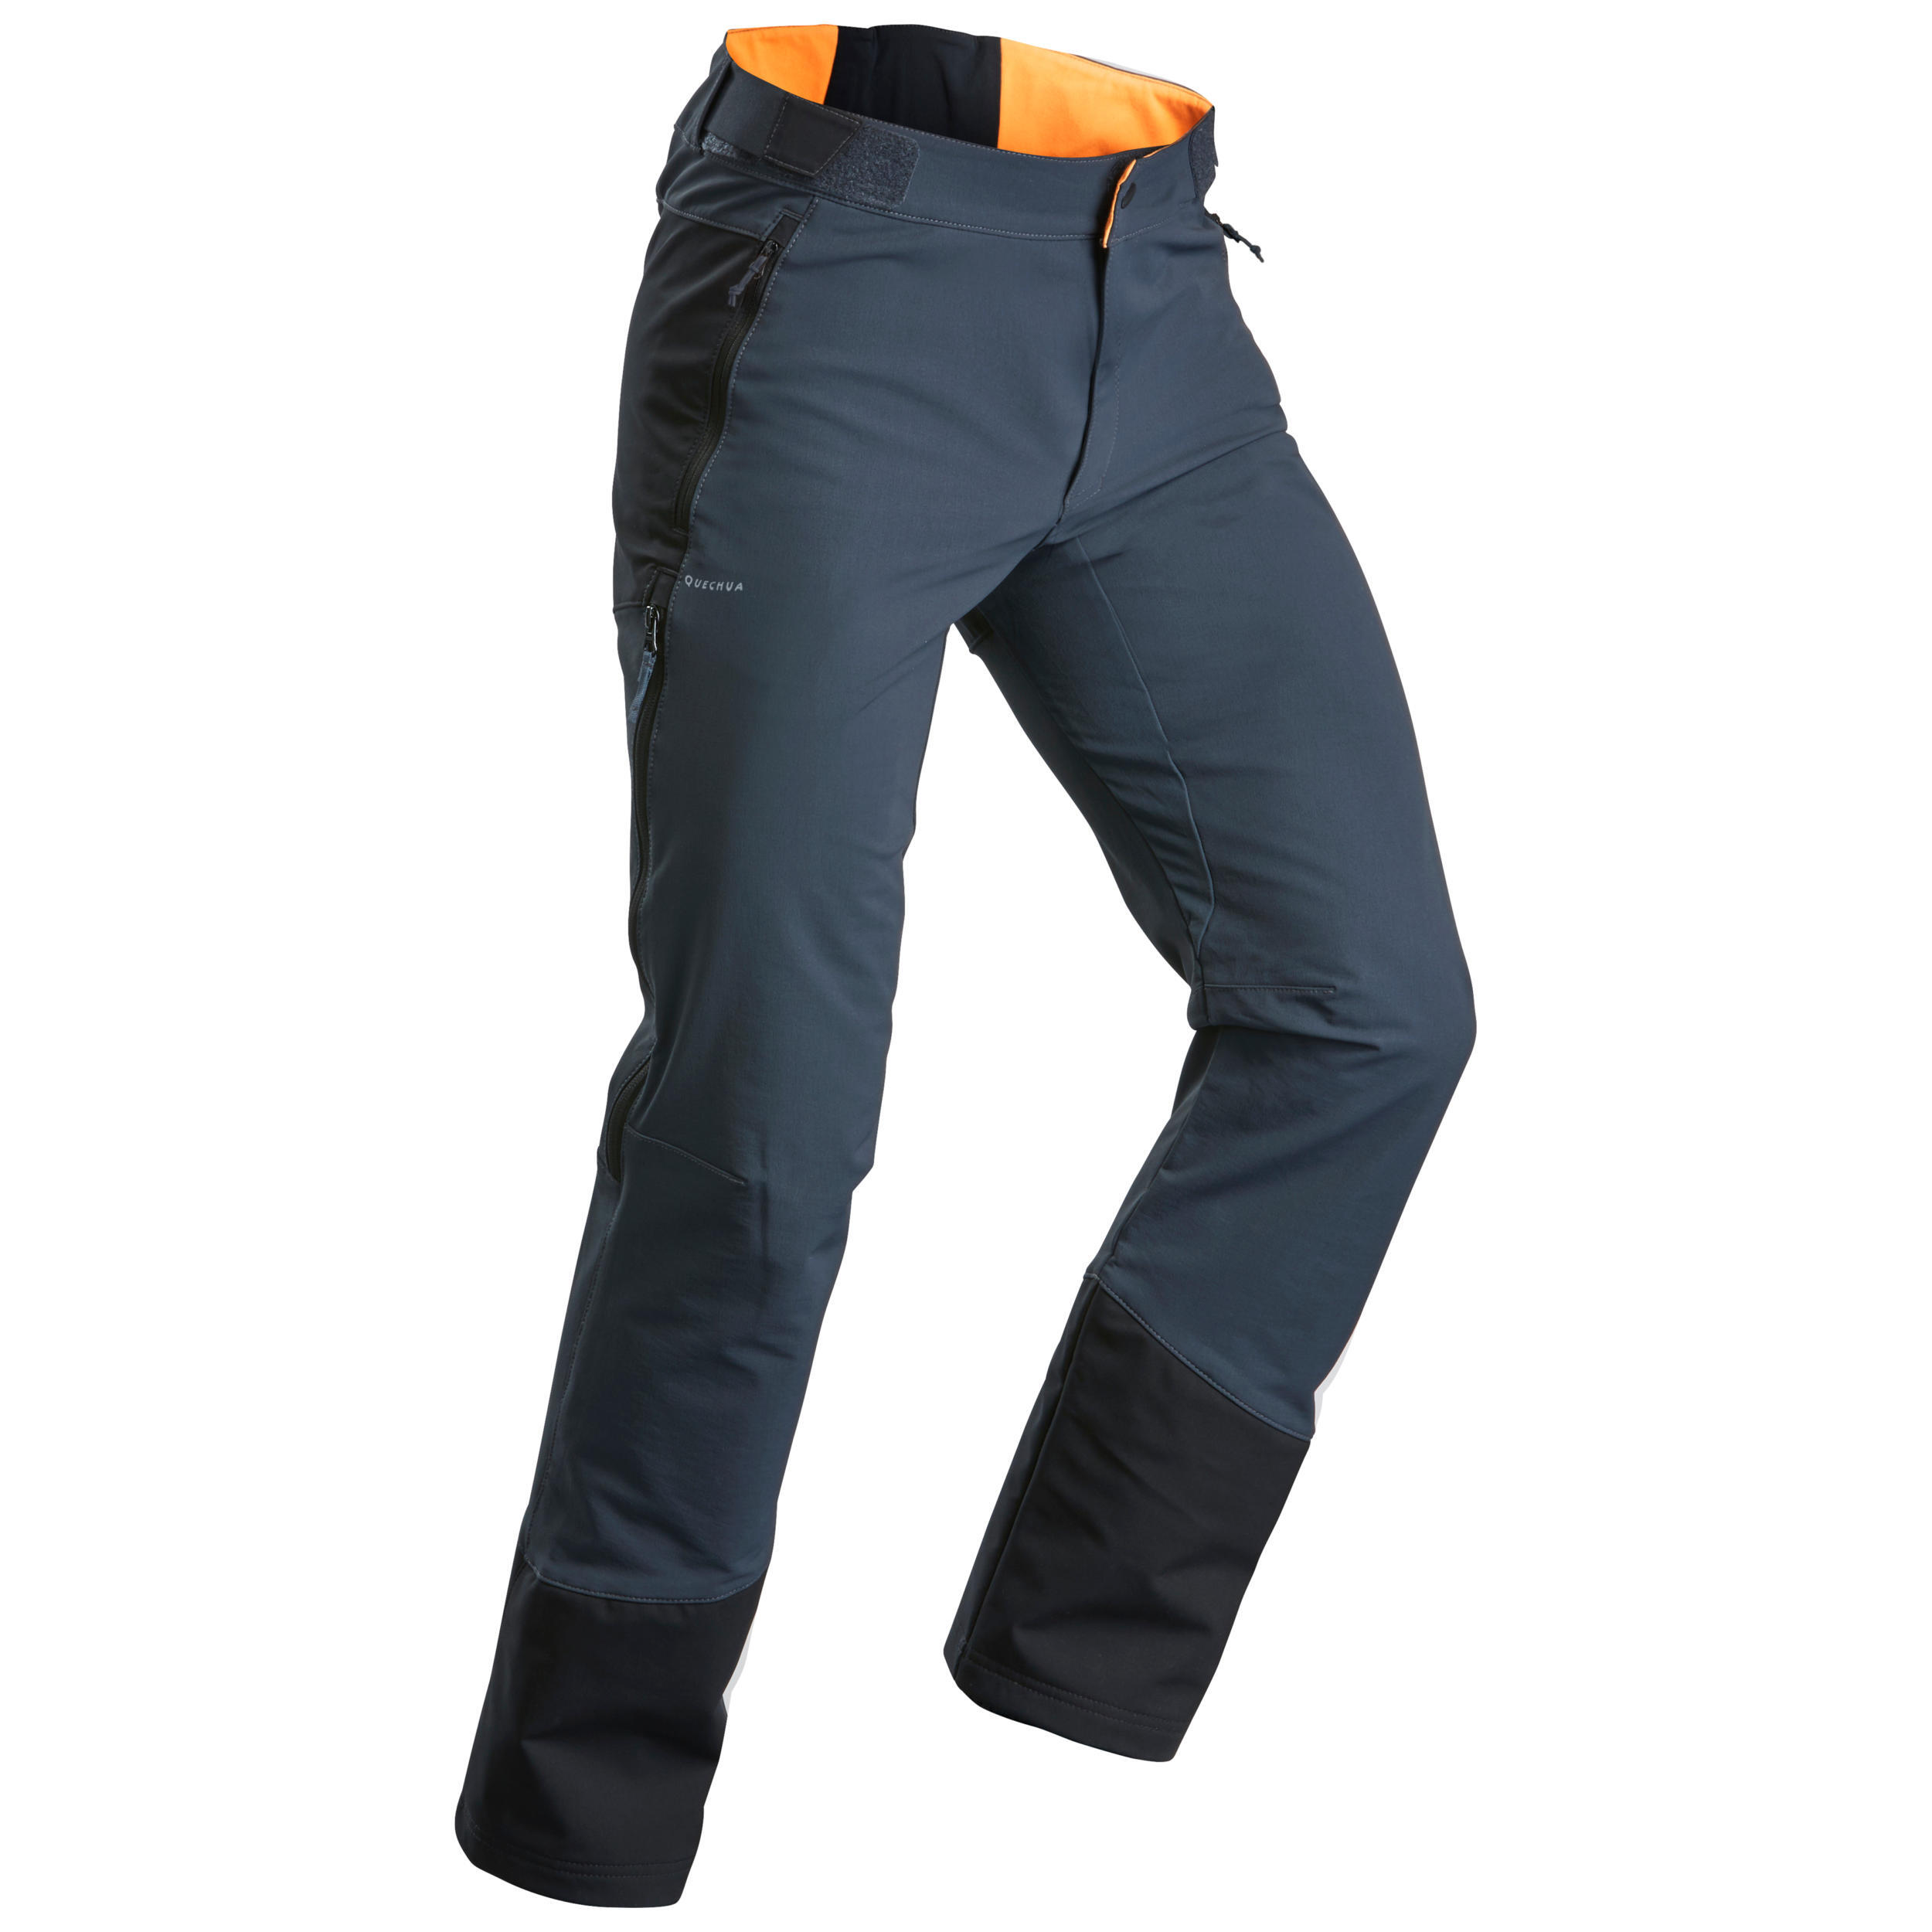 Men’s Warm Water-repellent Ventilated Hiking Trousers - SH500 MOUNTAIN VENTIL   2/9